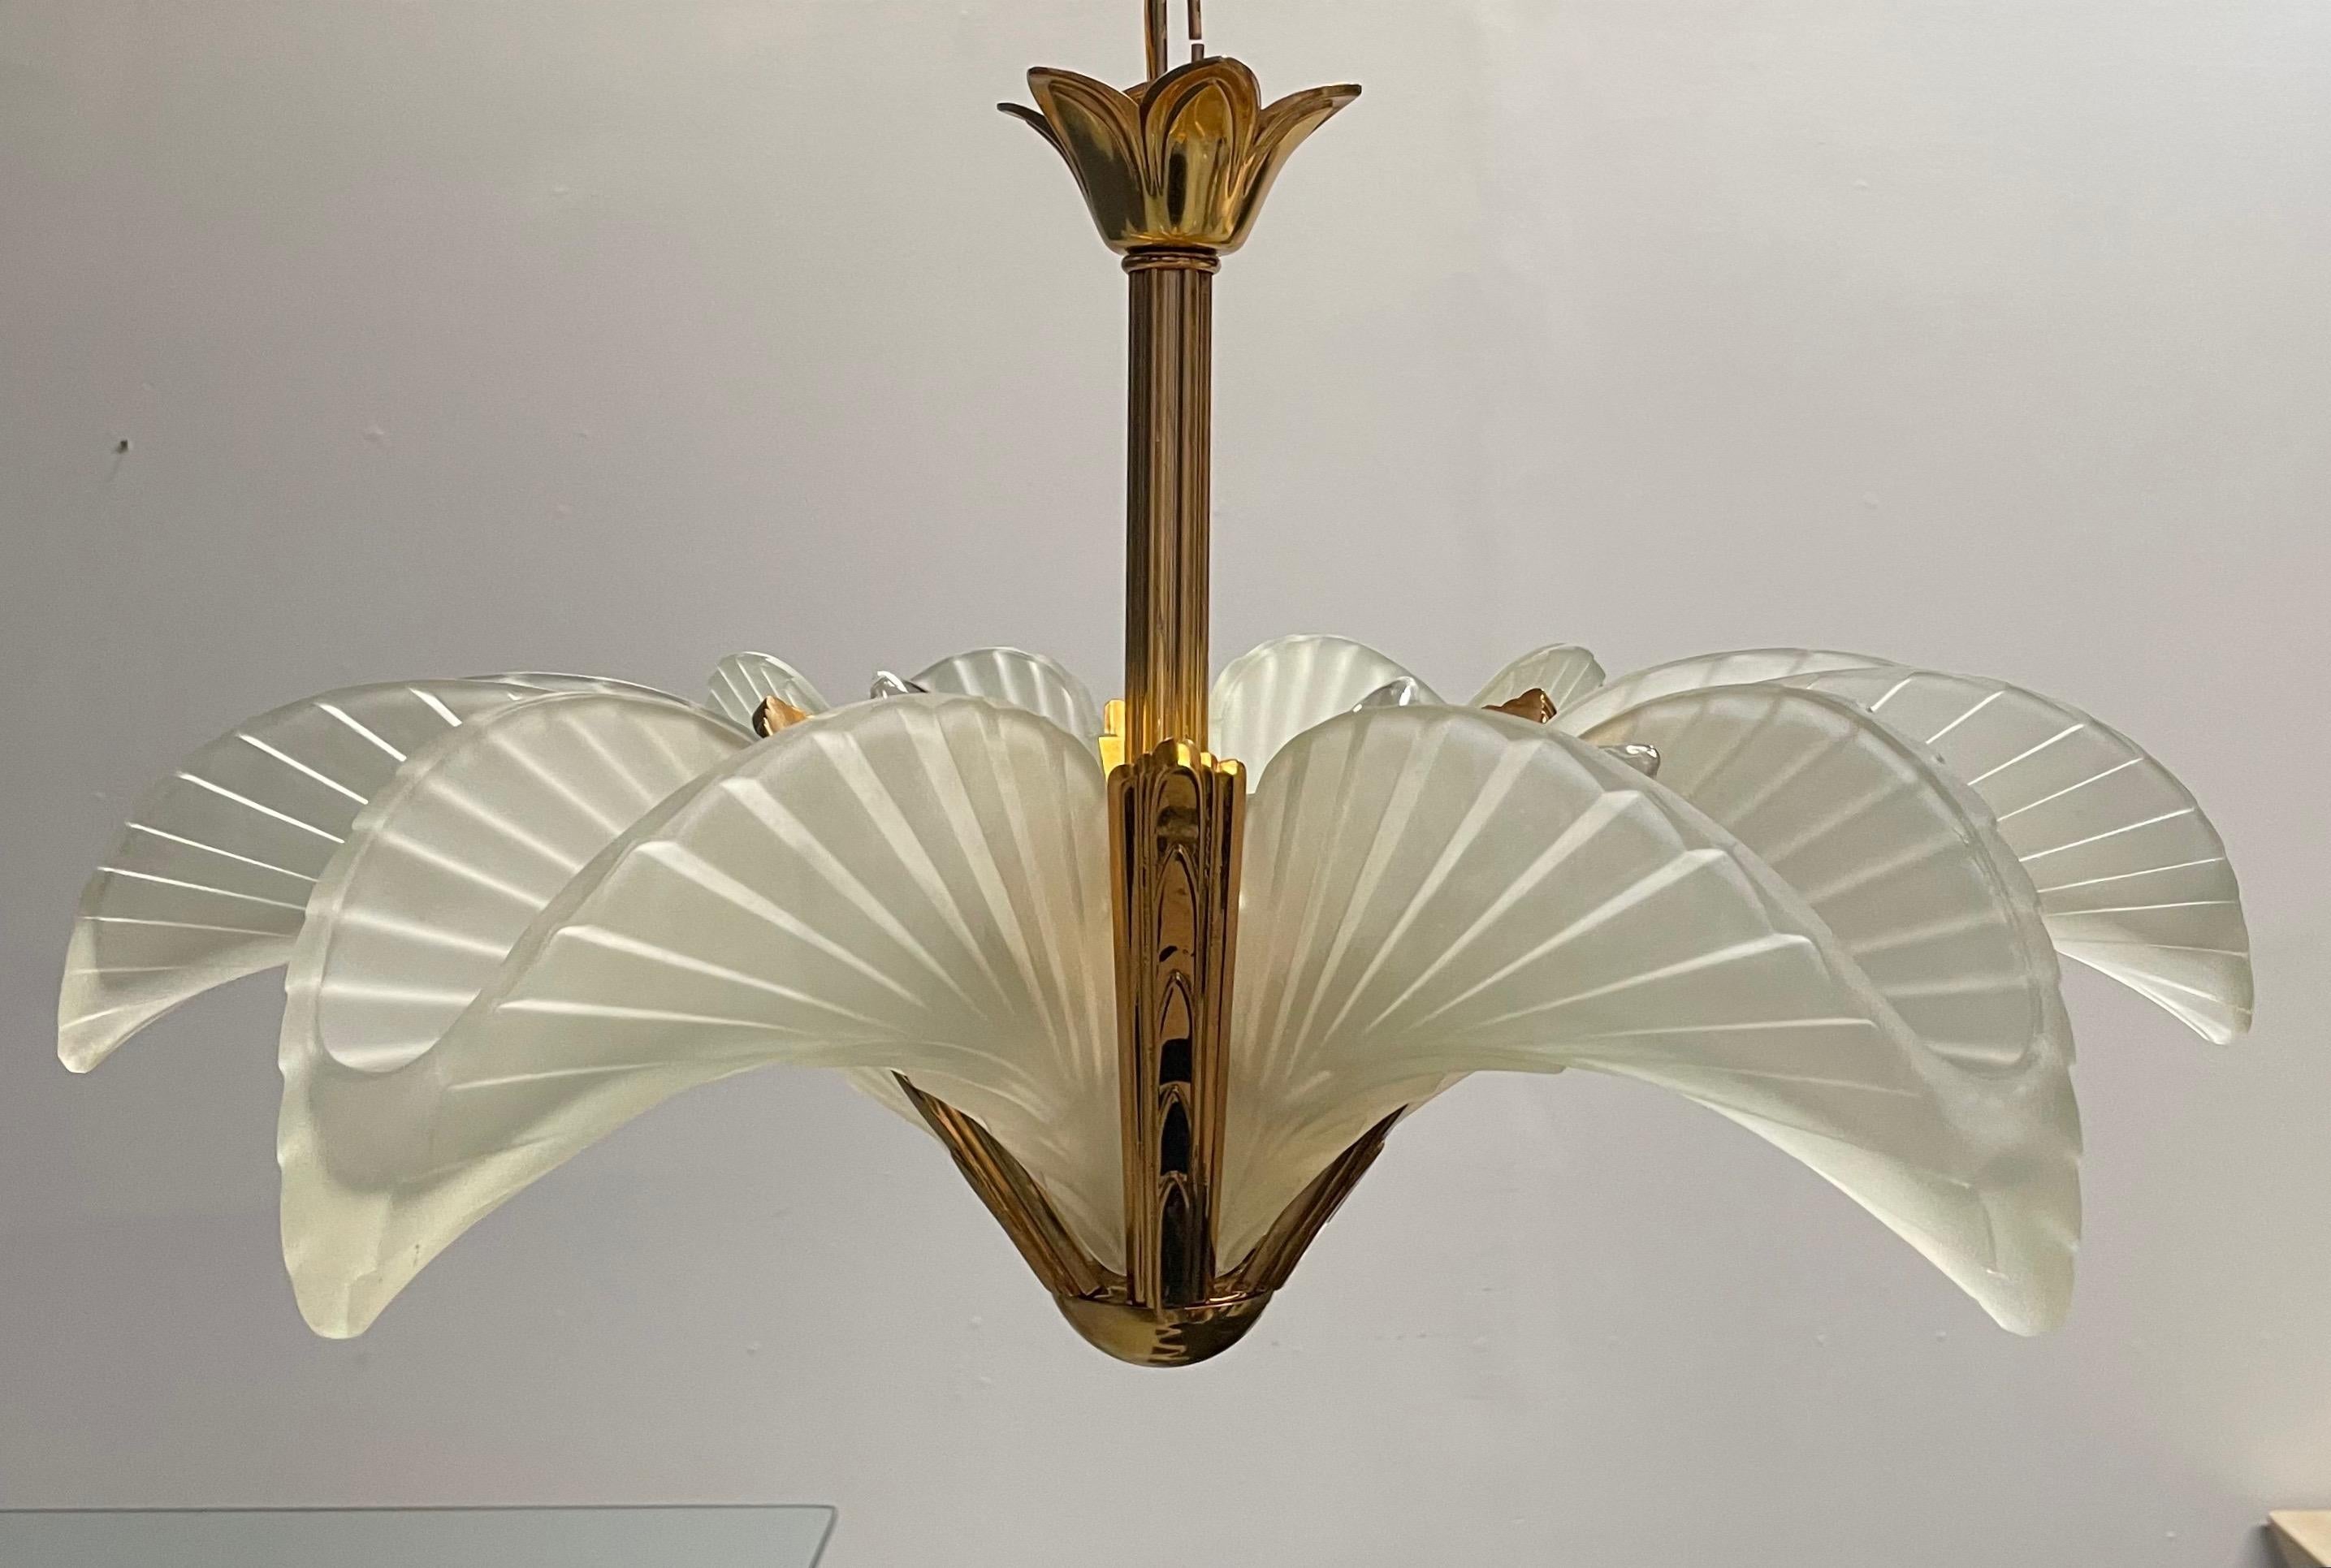 This stunning high quality fixture is from the early 1980s and created in a Classic Art Deco form. It features solid brass frames, thick frosted glass shades, and take 5 standard bulbs. It also includes it's original brass hanging chain and ceiling